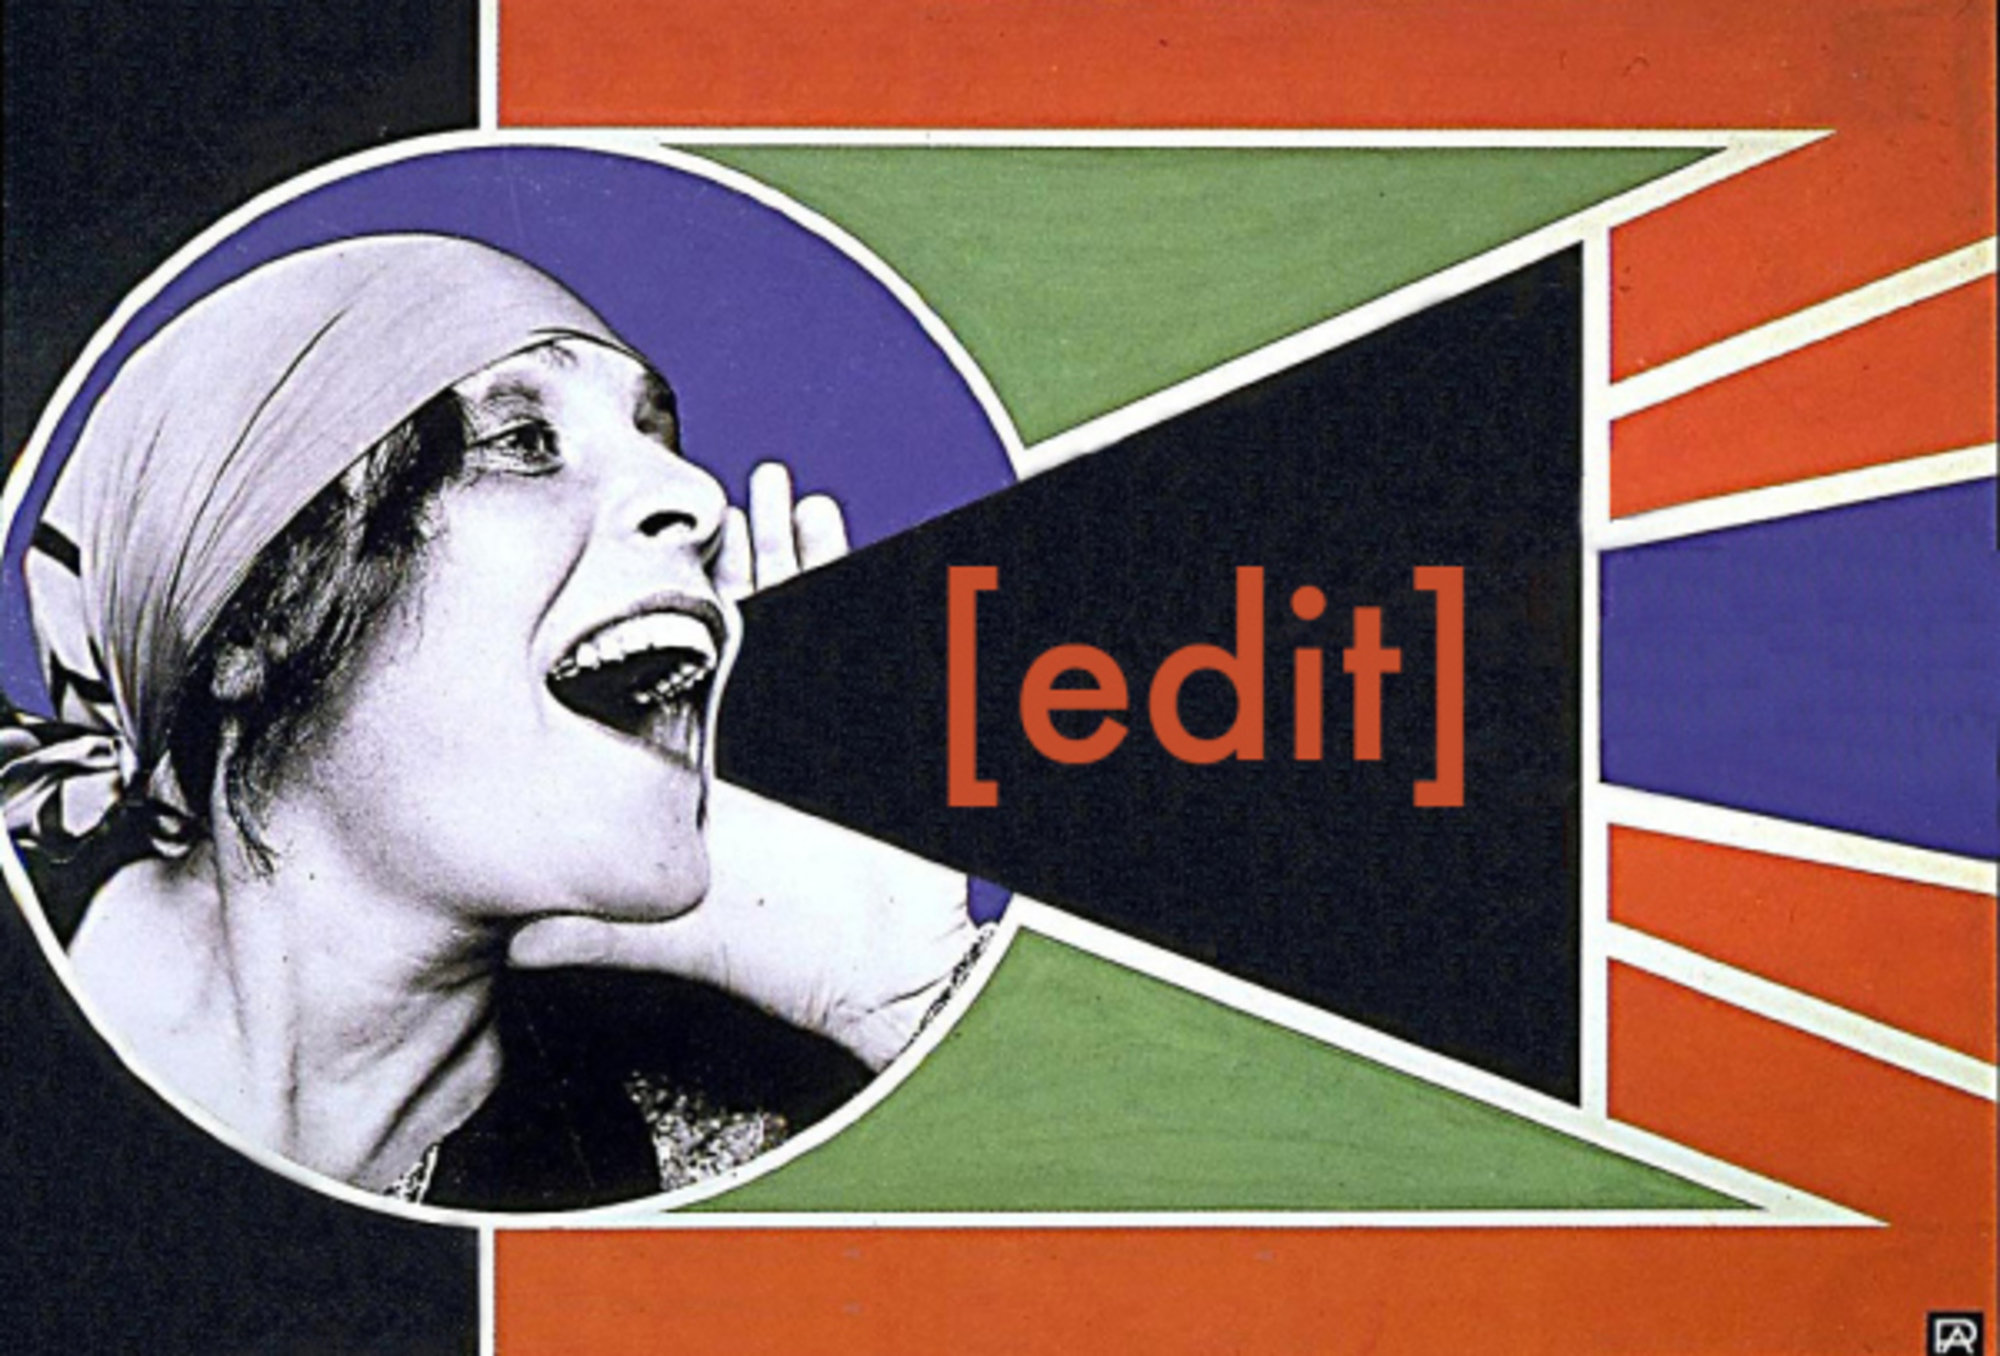 An image of a woman with short hair, her hand to her mouth as if calling out, with edited collaged colors around her and text reading "edit."